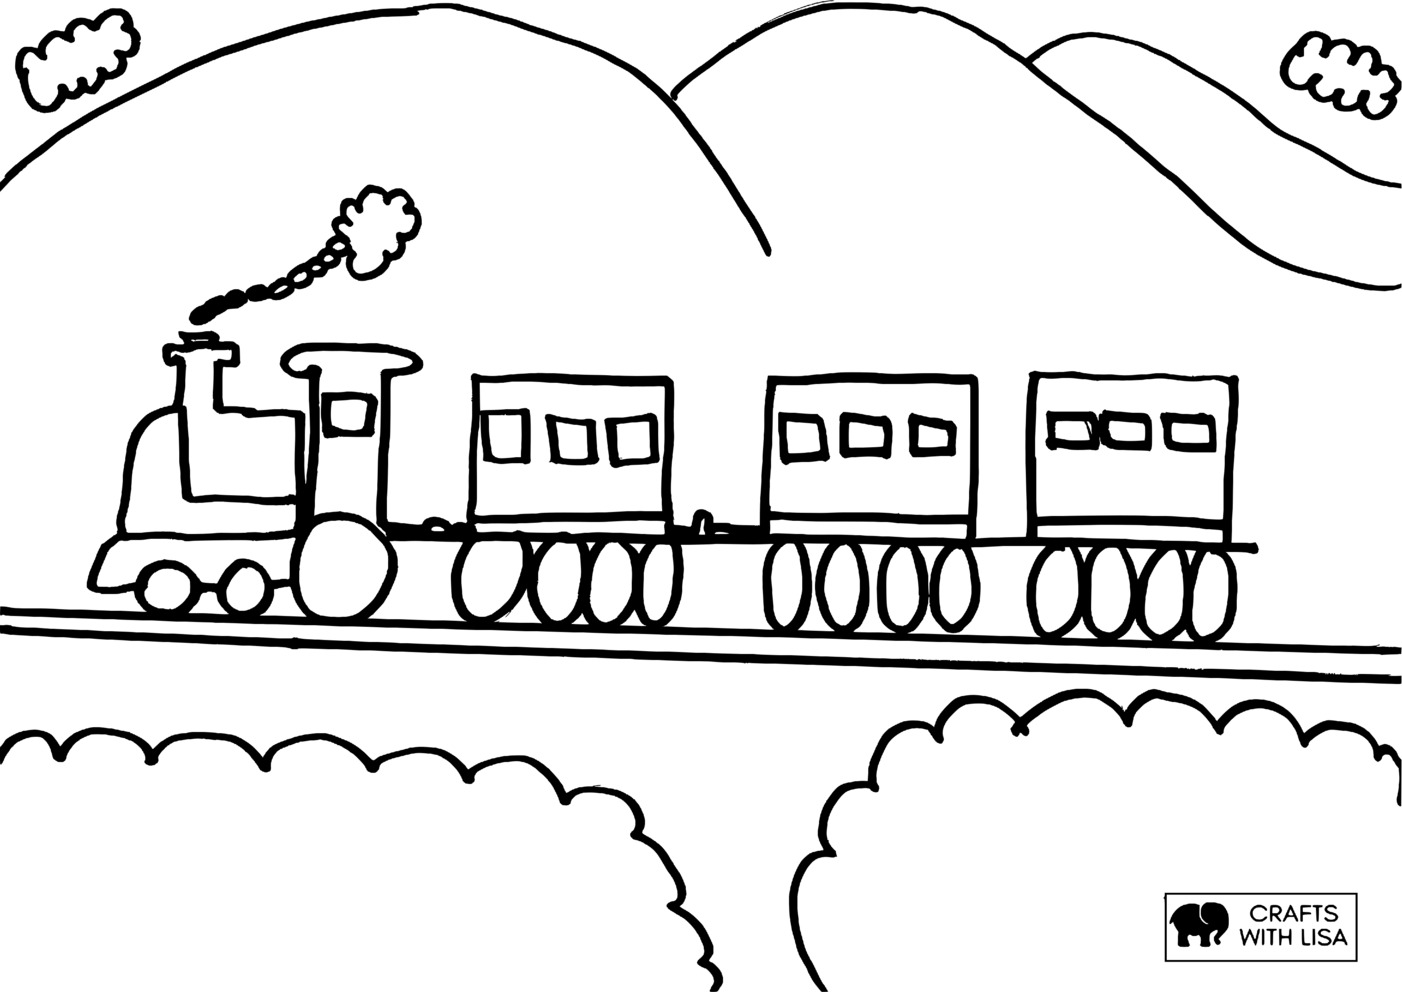 Coloring page